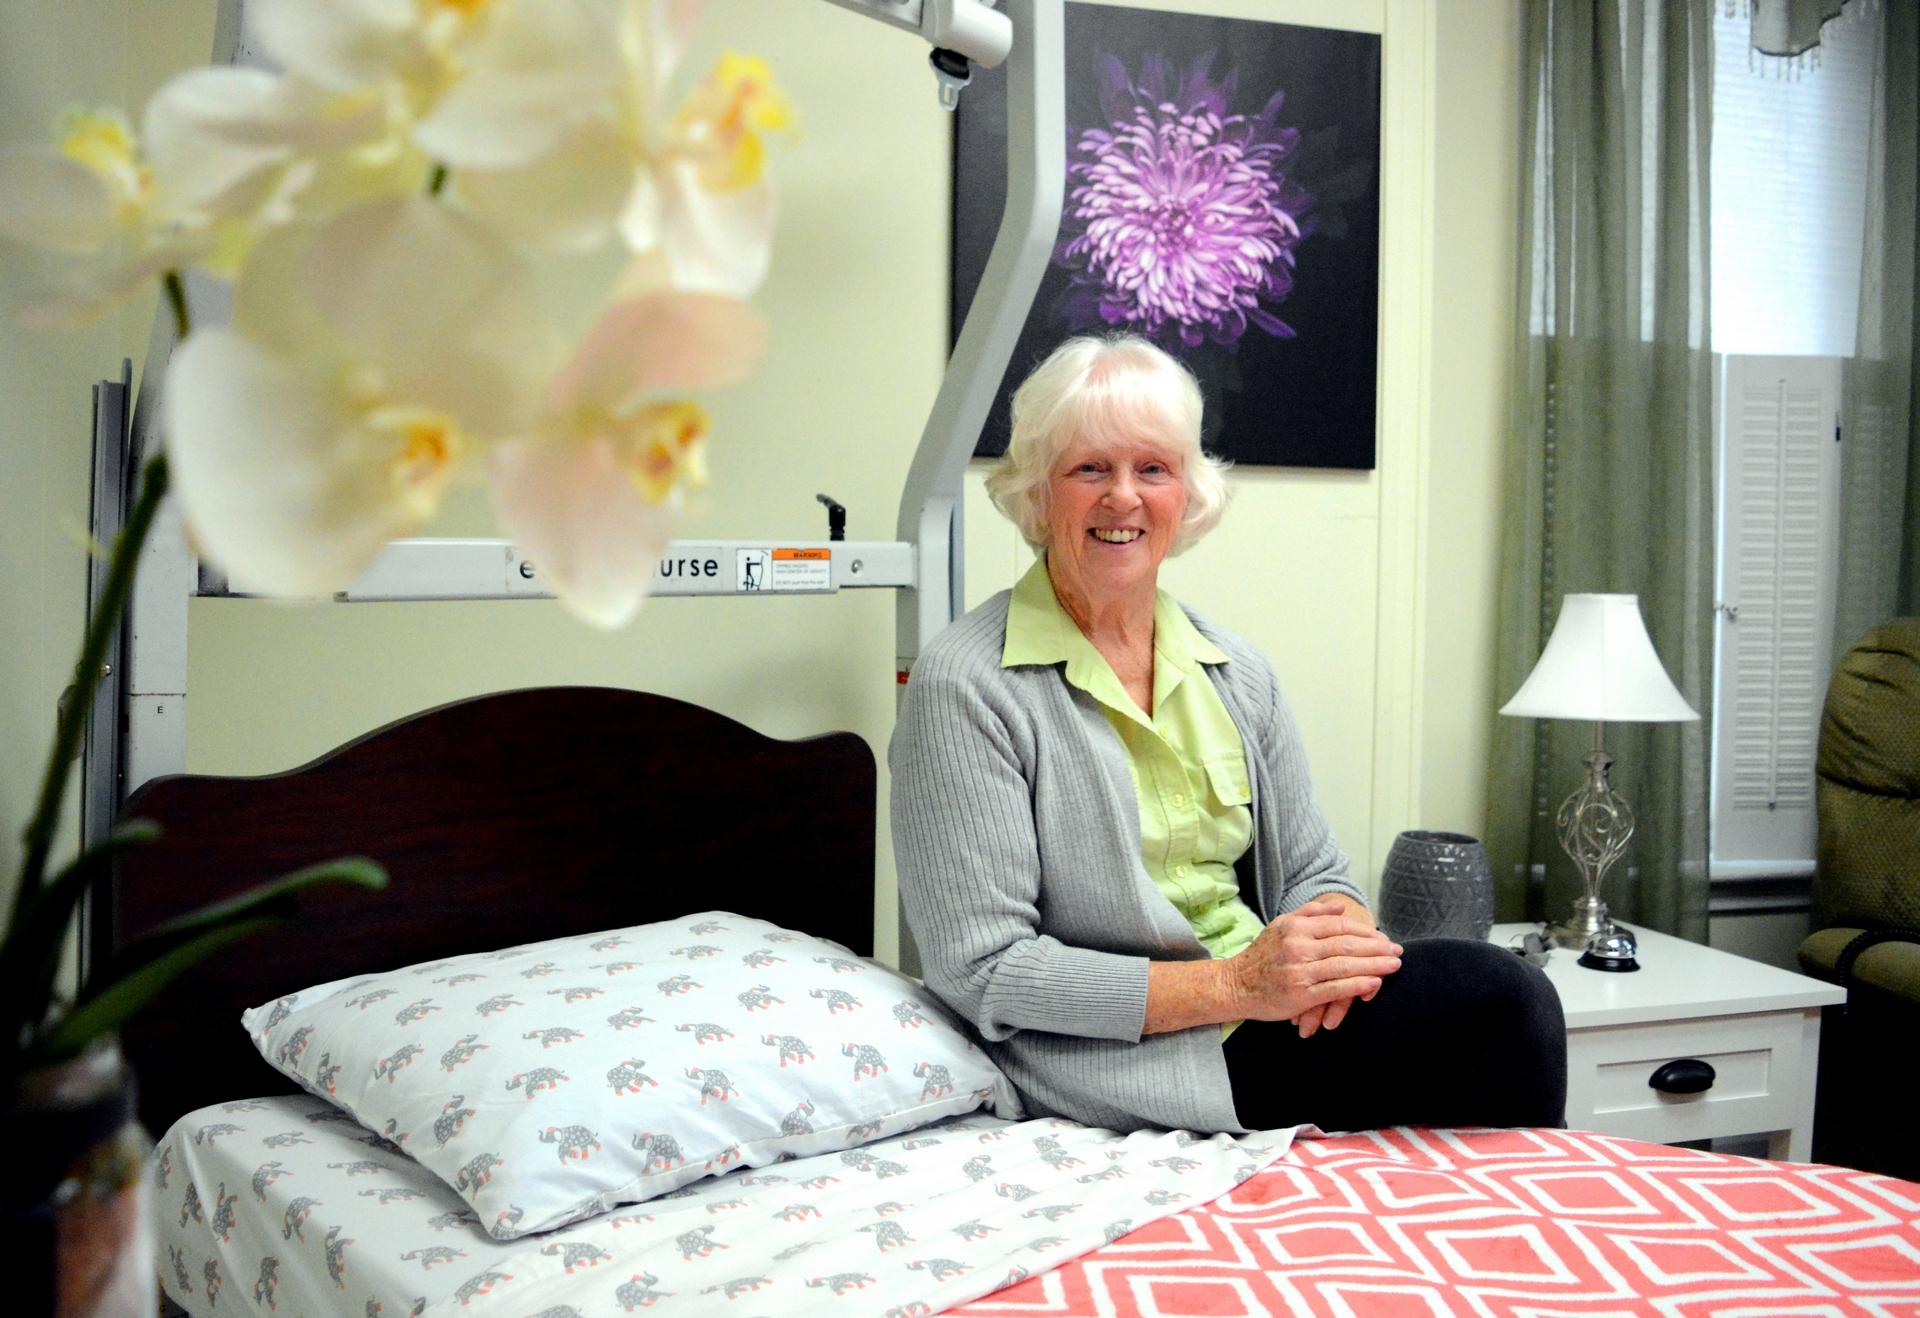 Abraham House caregiver reflects on 20 years